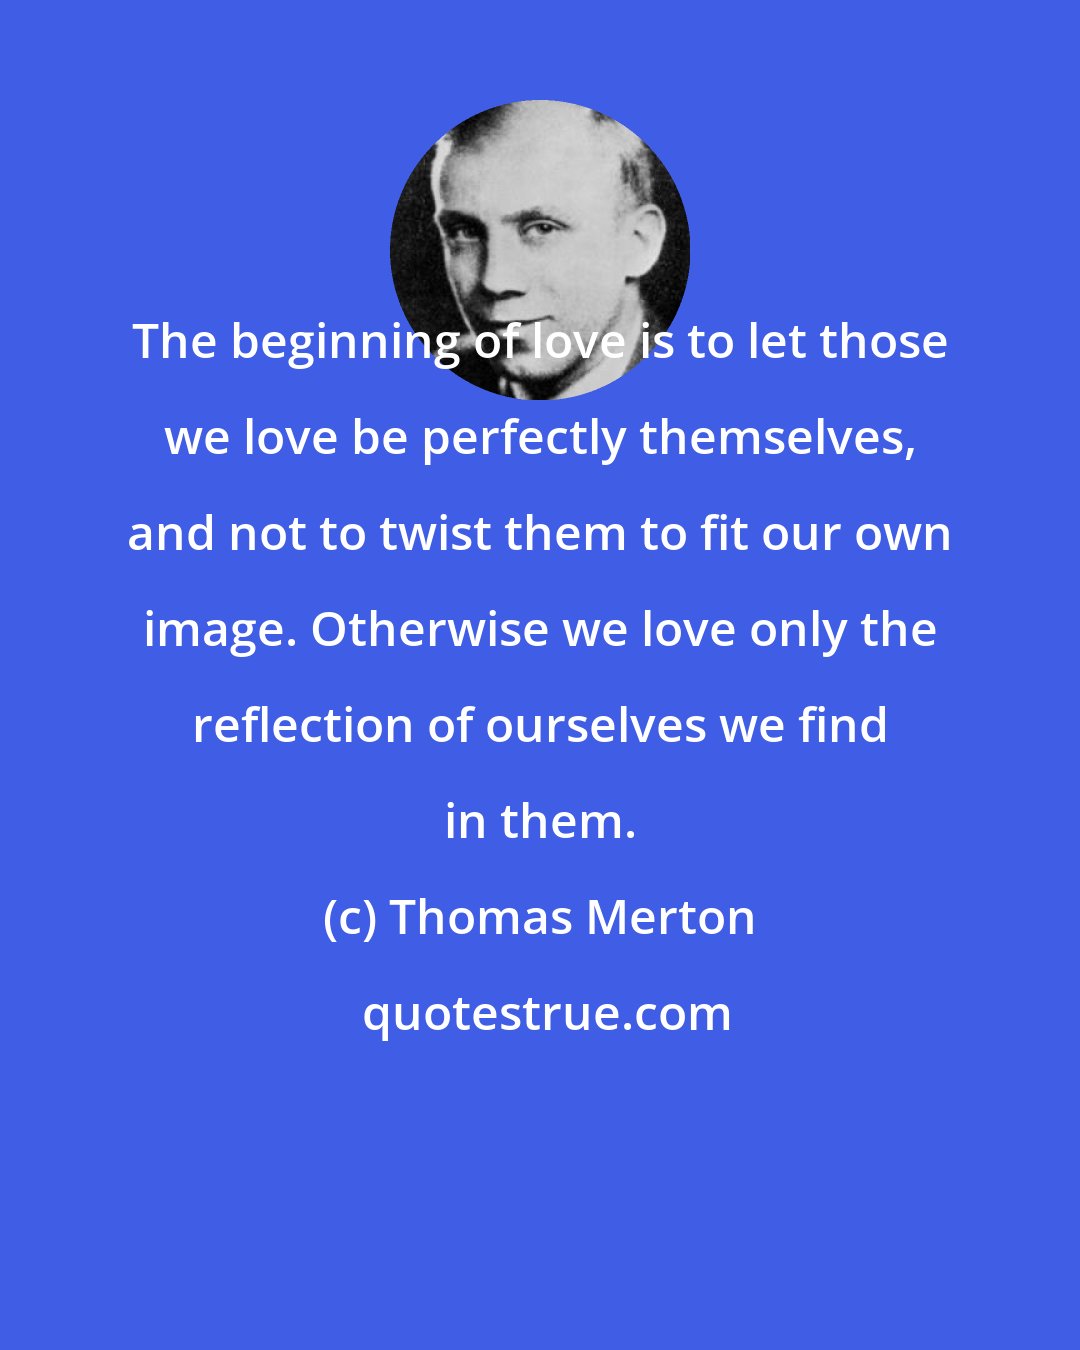 Thomas Merton: The beginning of love is to let those we love be perfectly themselves, and not to twist them to fit our own image. Otherwise we love only the reflection of ourselves we find in them.